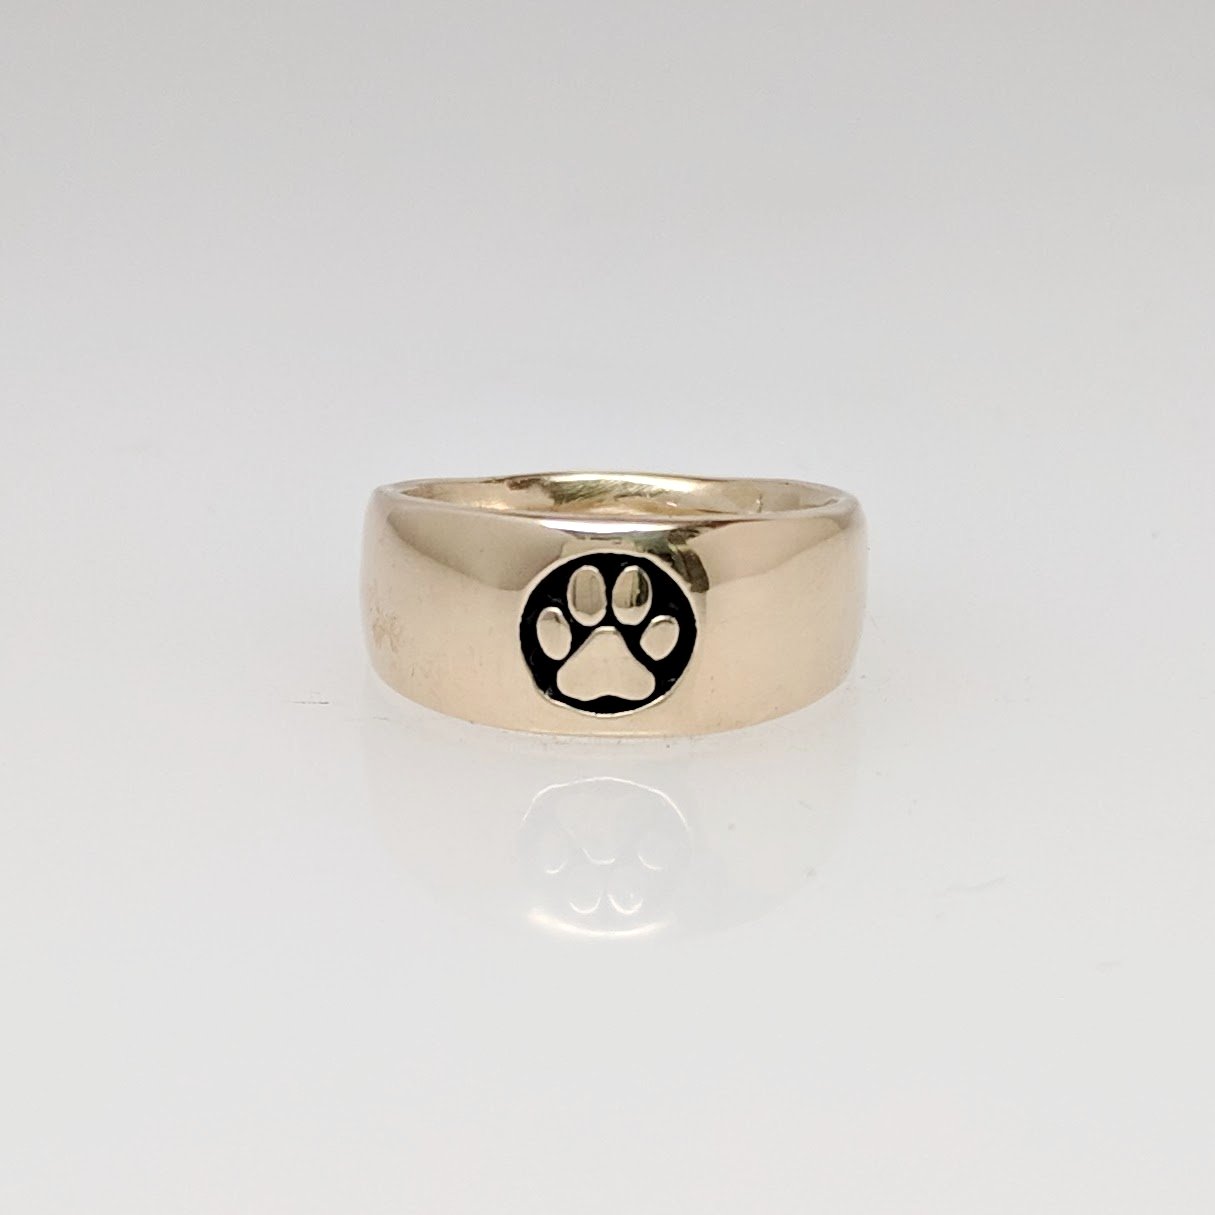 8mm Cute Animal Paw Prints Stainless Steel Unisex Ring (4 colors)